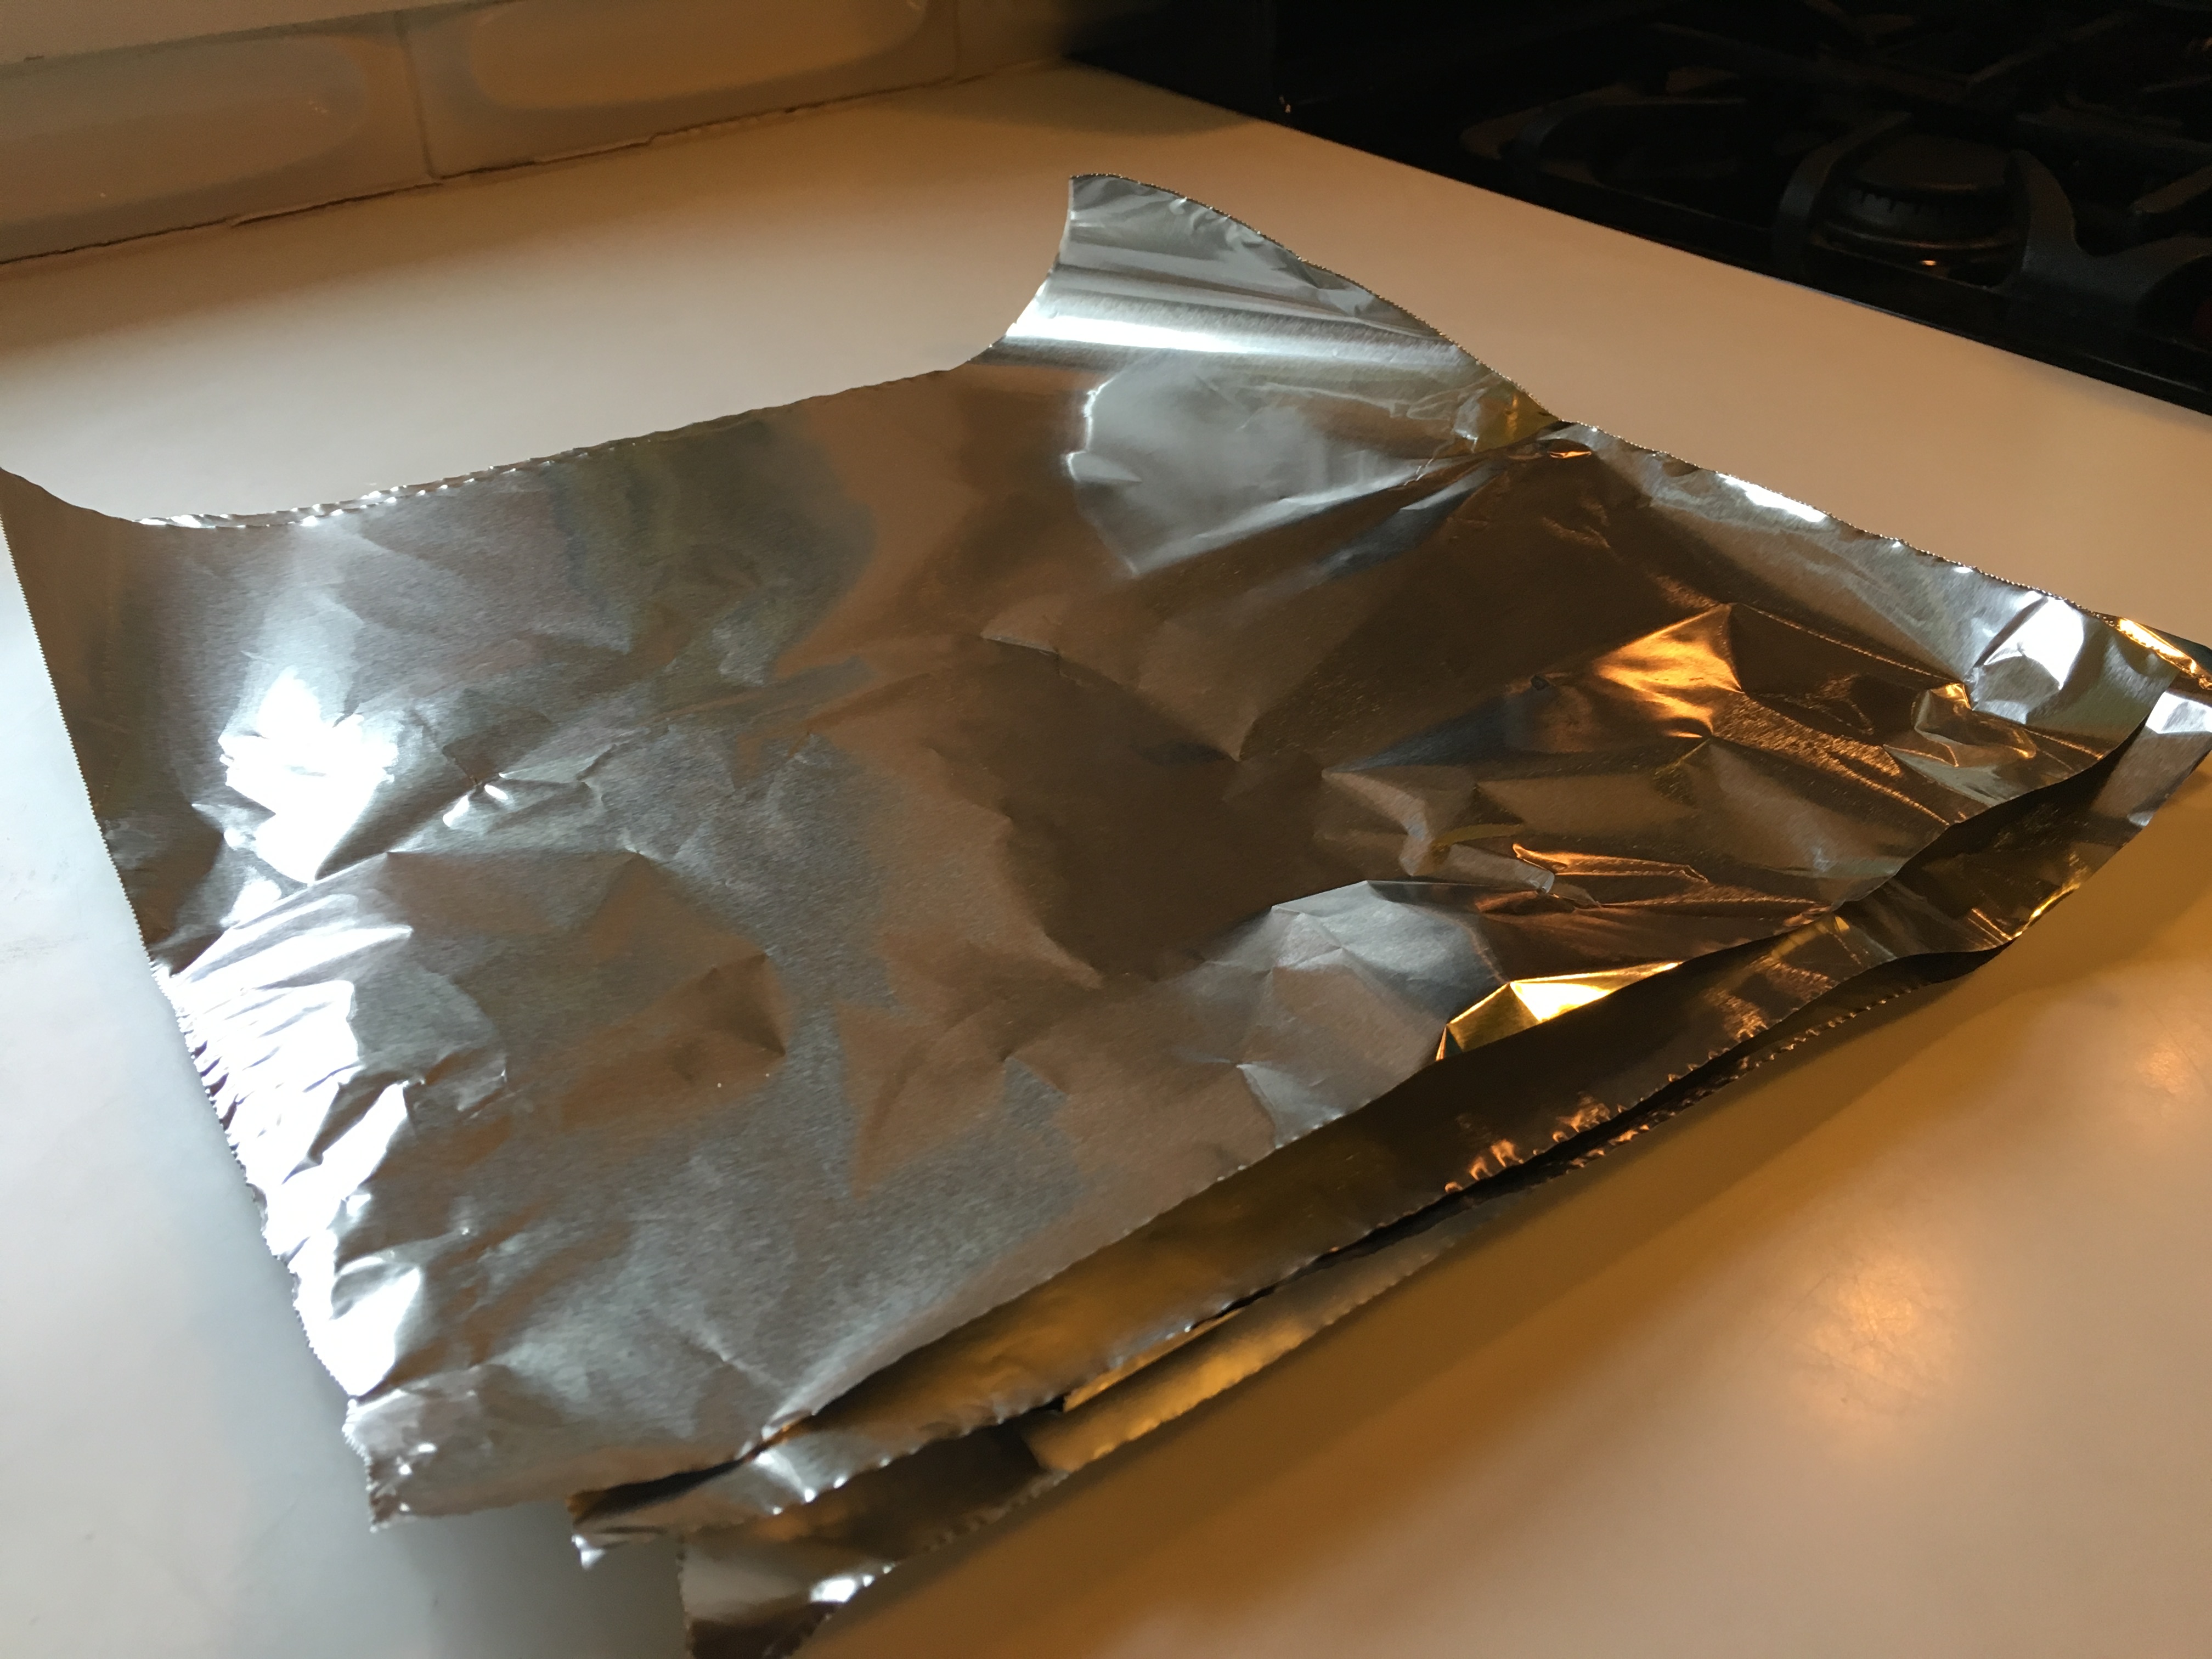 Have your tinfoil prepped in advance so you don't have to fiddle with it later.